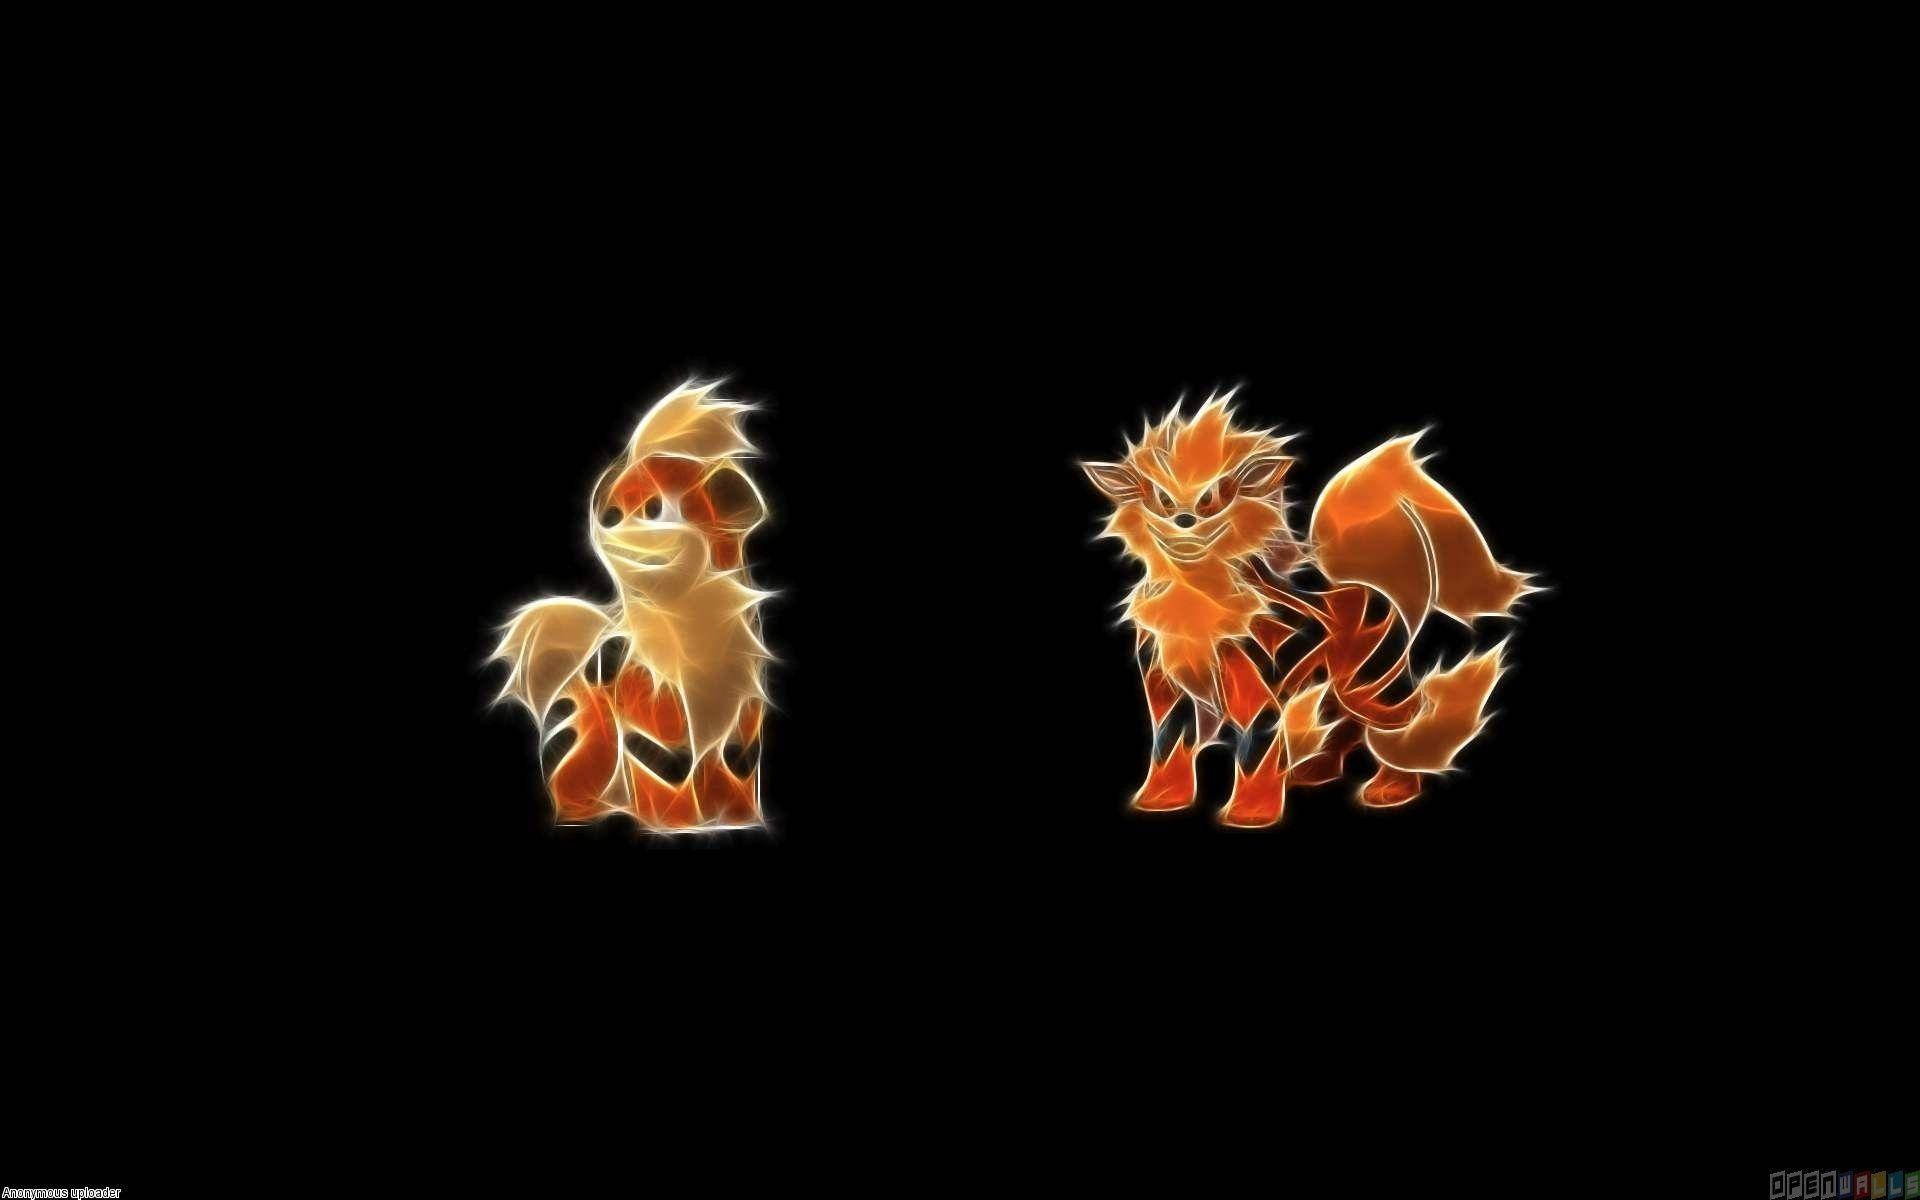 Top 999+ Arcanine Wallpaper Full HD, 4K✅Free to Use